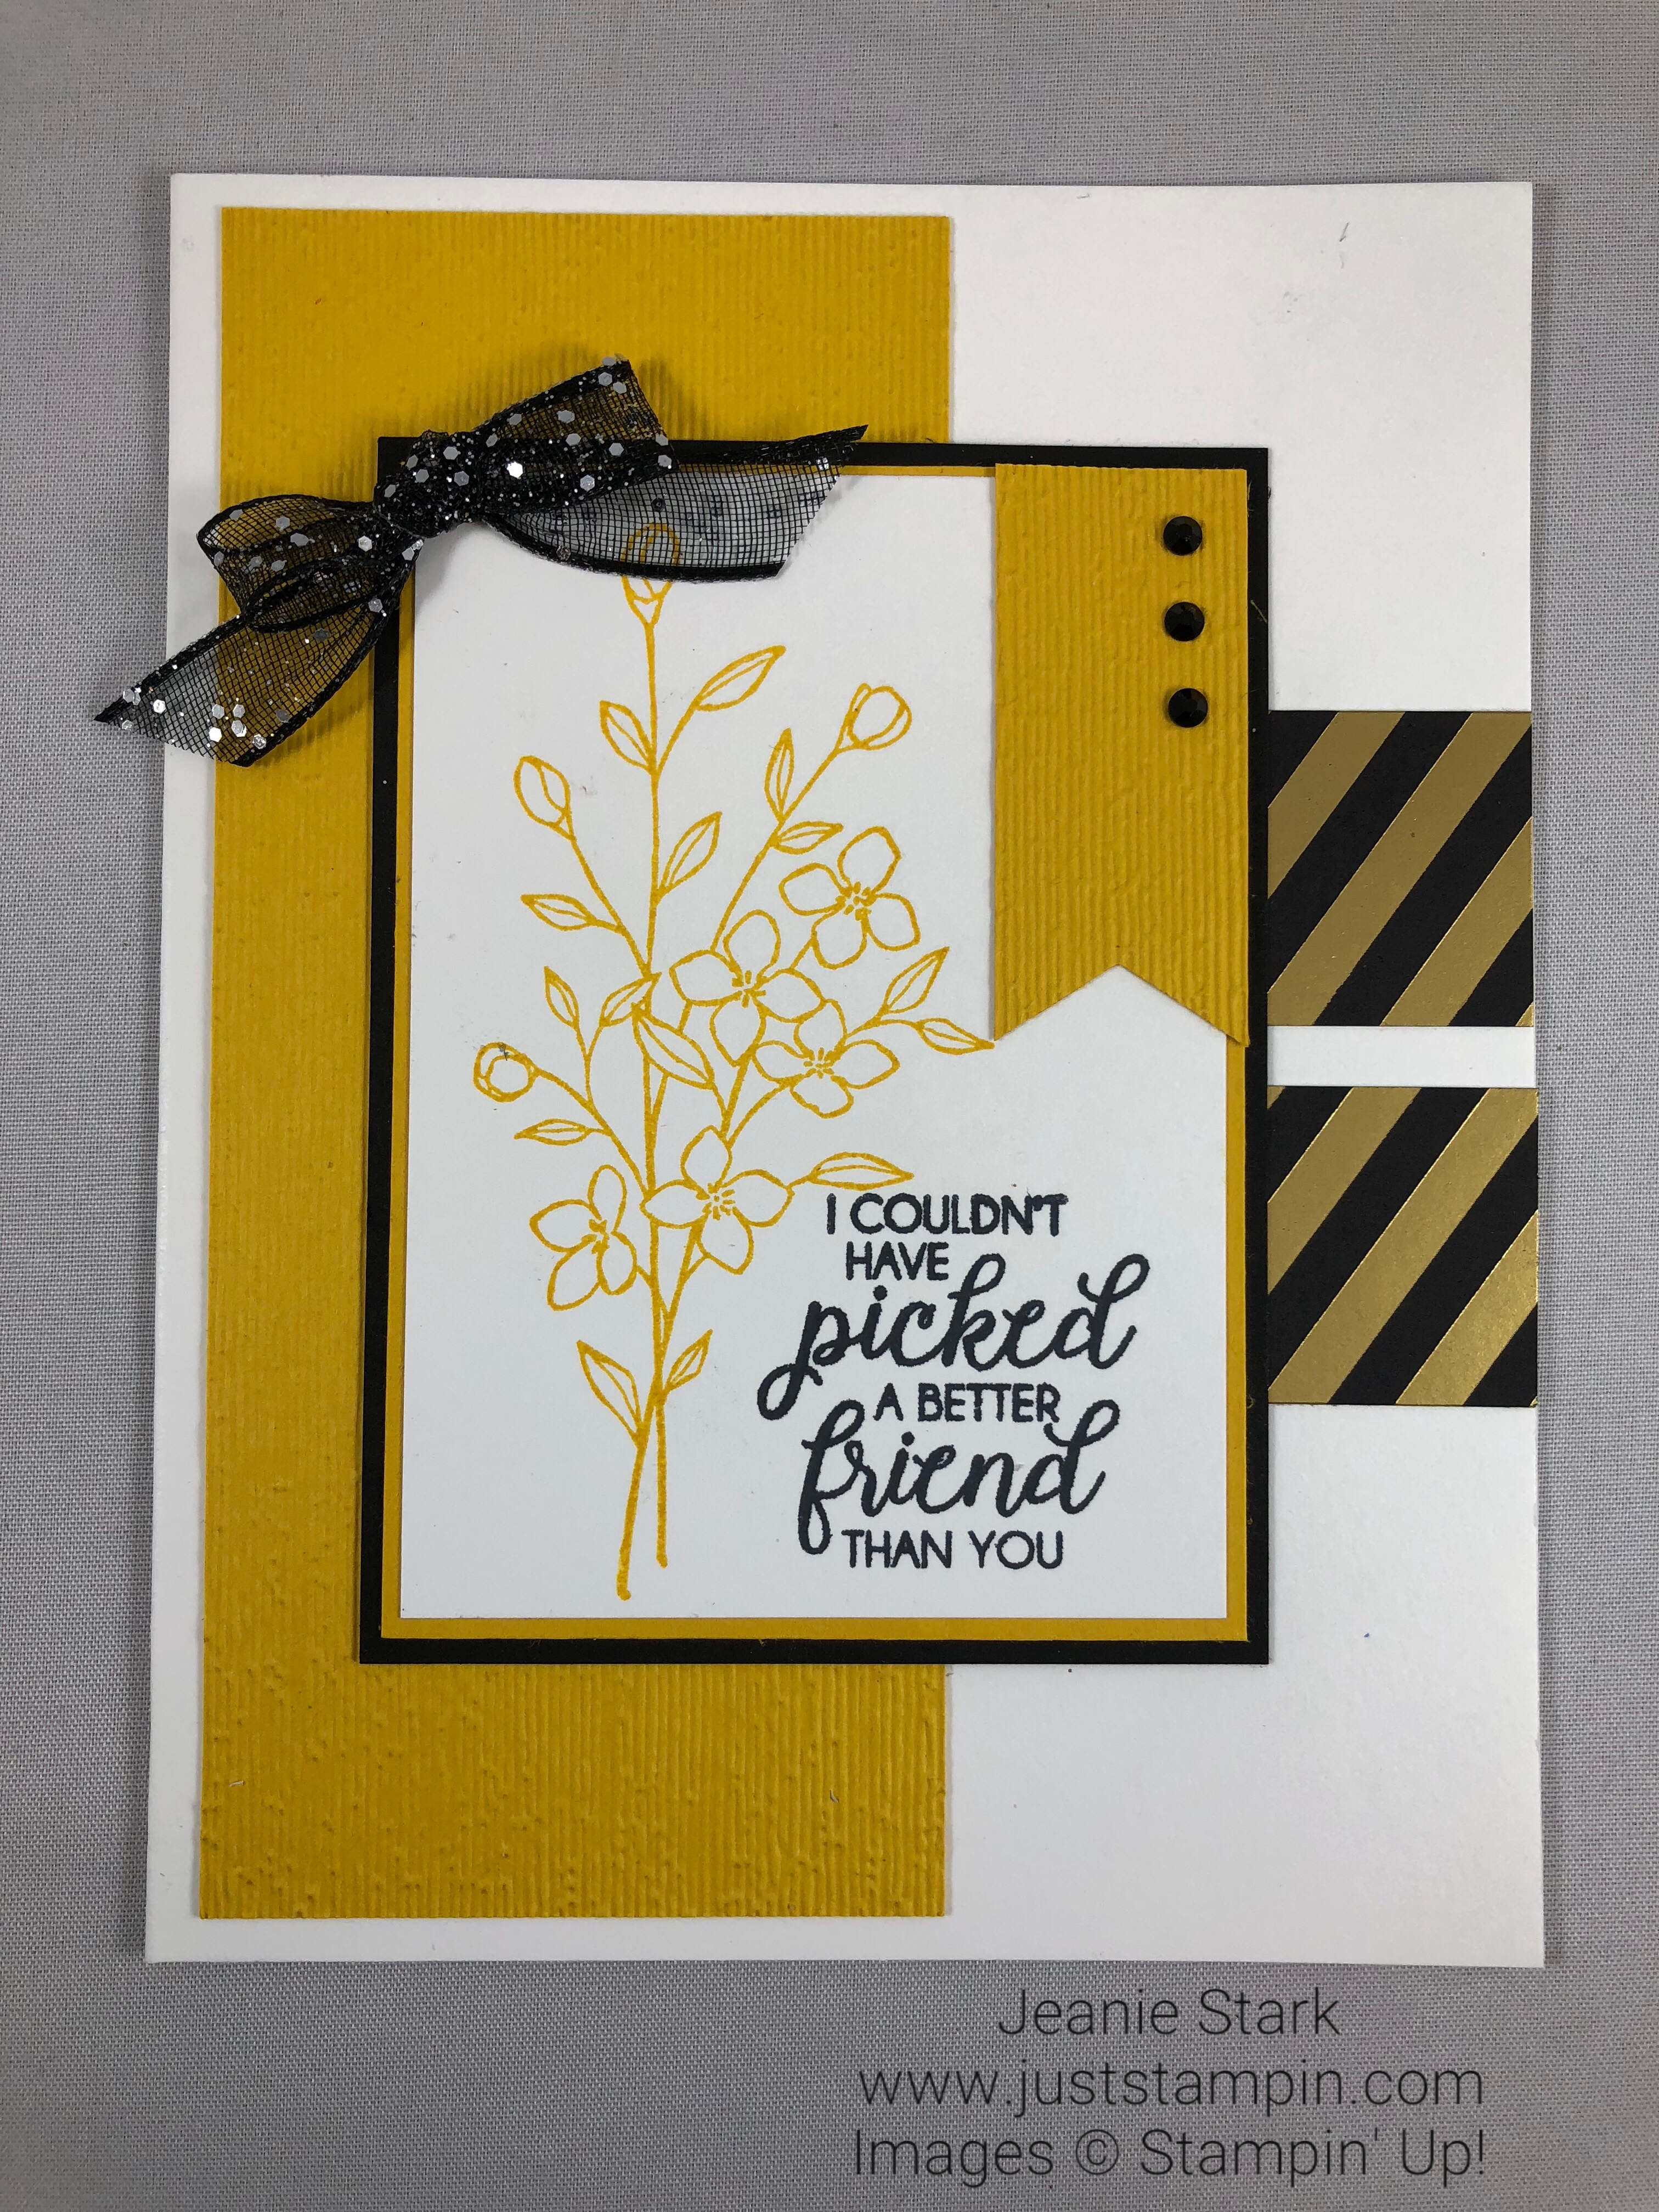 Stampin Up Touches of Texture layered and embossed Birthday card idea - Jeanie Stark StampinUp